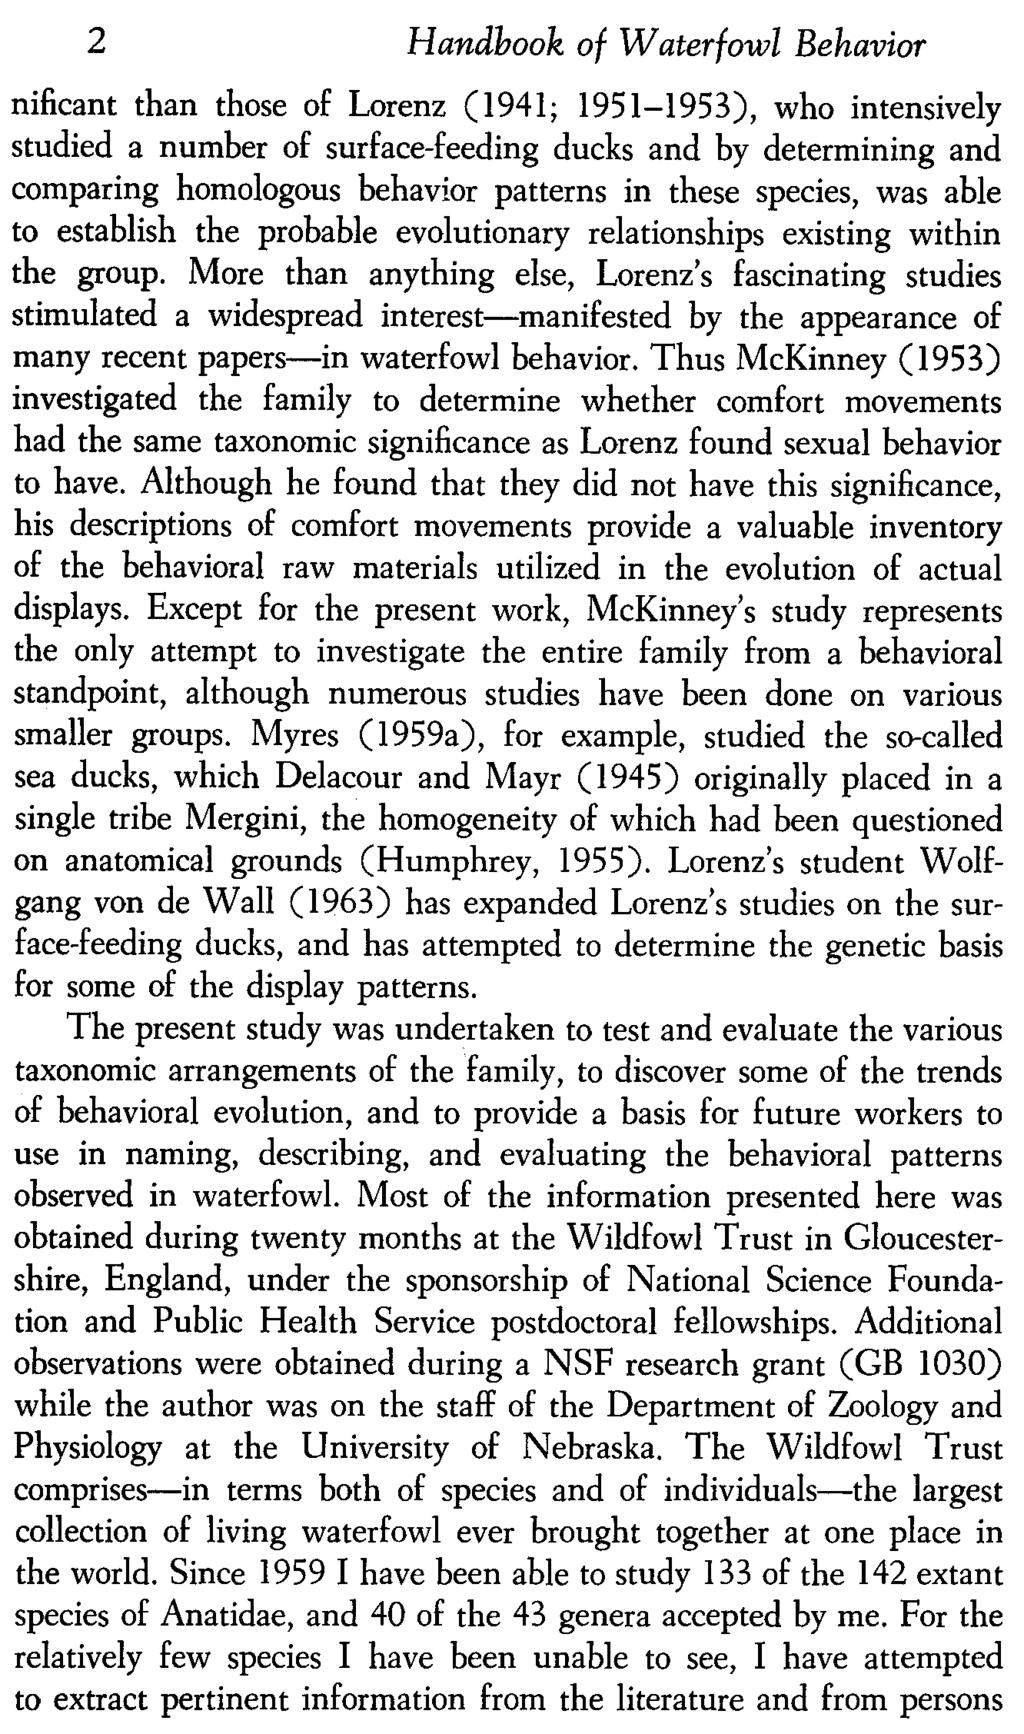 2 Handbook of Waterfowl Behavior nificant than those of Lorenz (194 1; 1951-1 953), who intensively studied a number of surface-feeding ducks and by determining and comparing homologous behavior